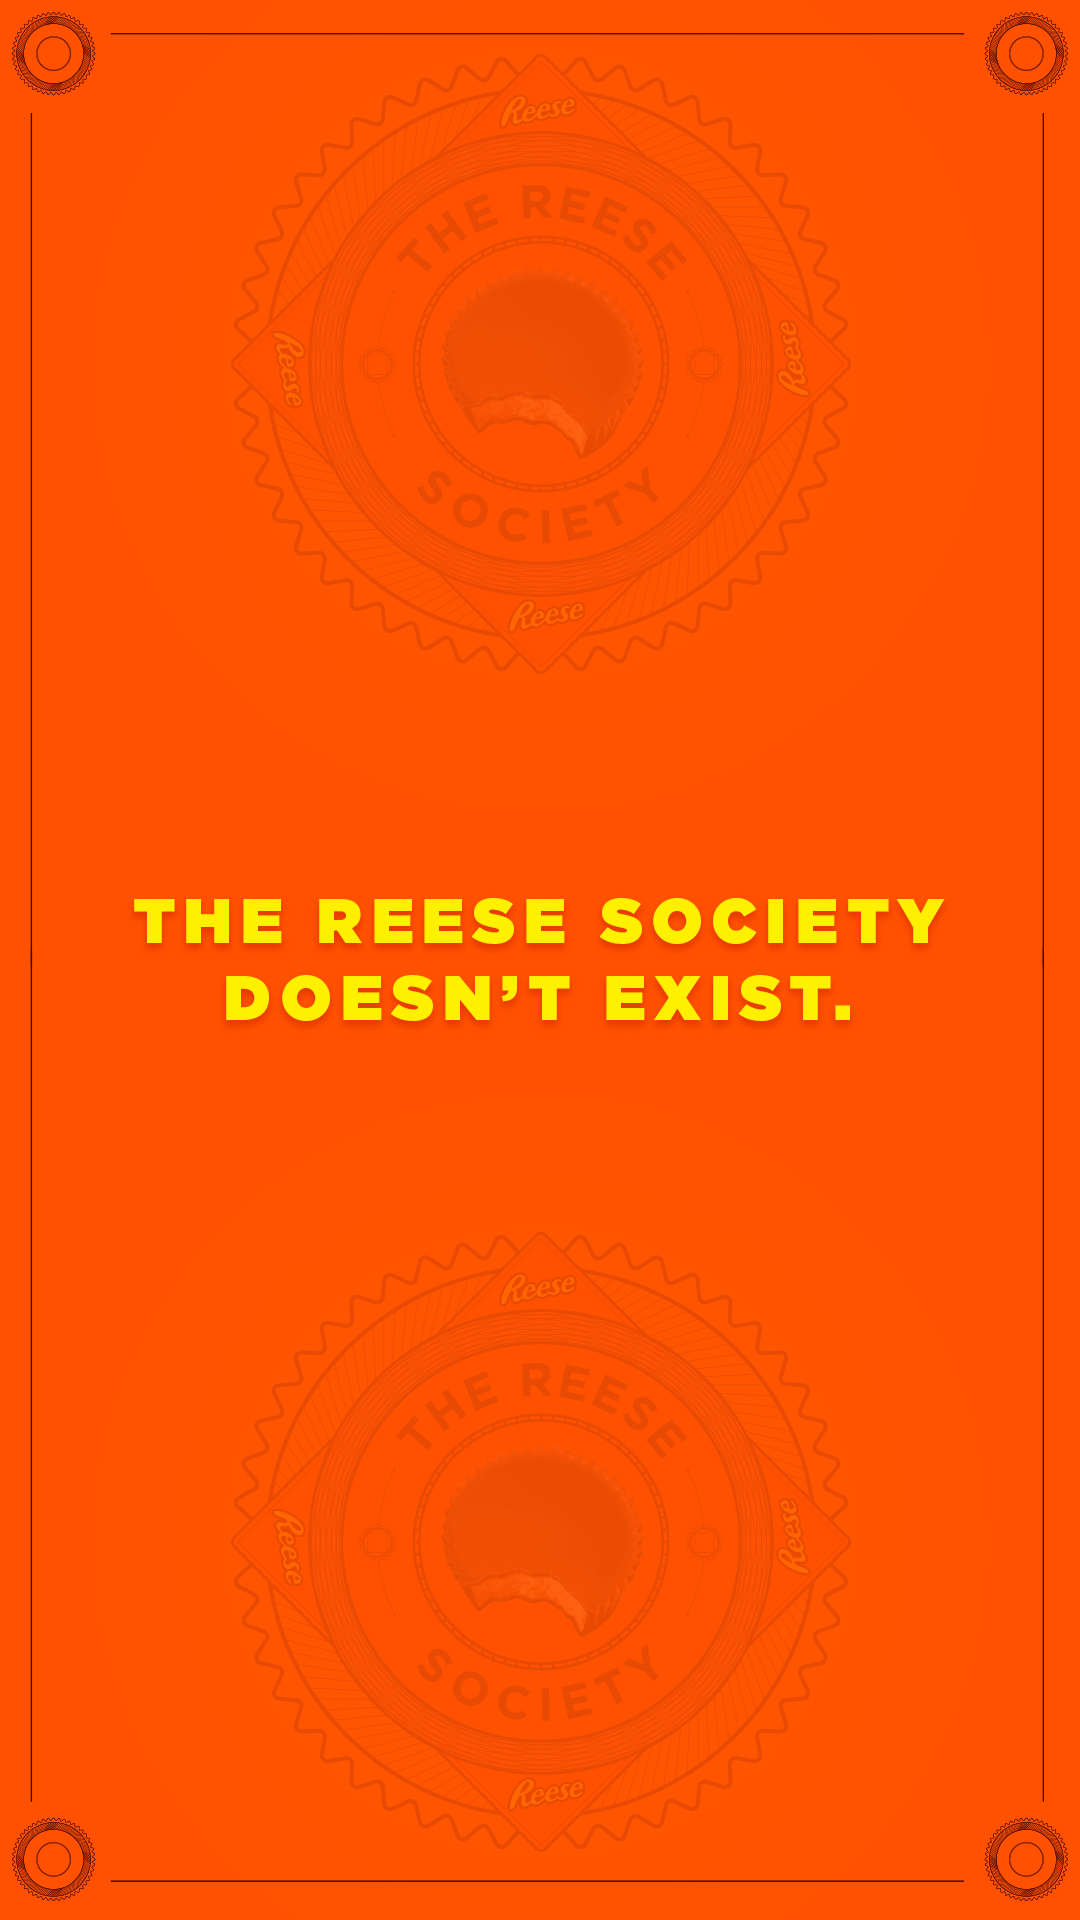 Reese-Society-IG_0051_The-Reese-Society-doesn’t-exist.png